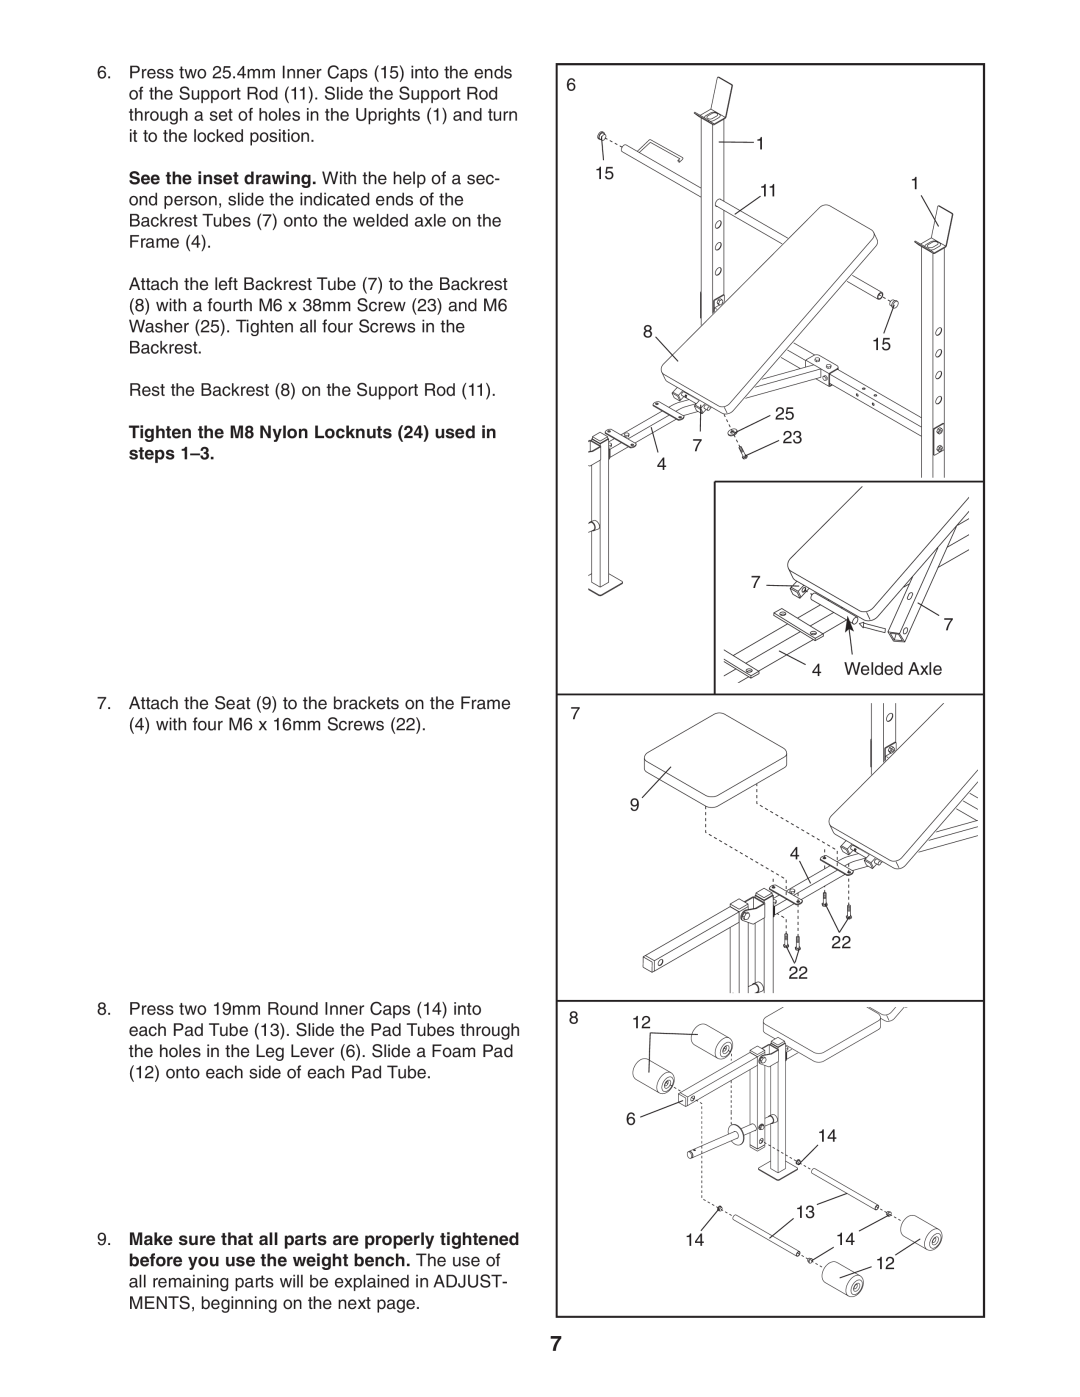 Weider 150722 user manual See the inset drawing. With the help of a sec, Tighten the M8 Nylon Locknuts 24 used in, steps 